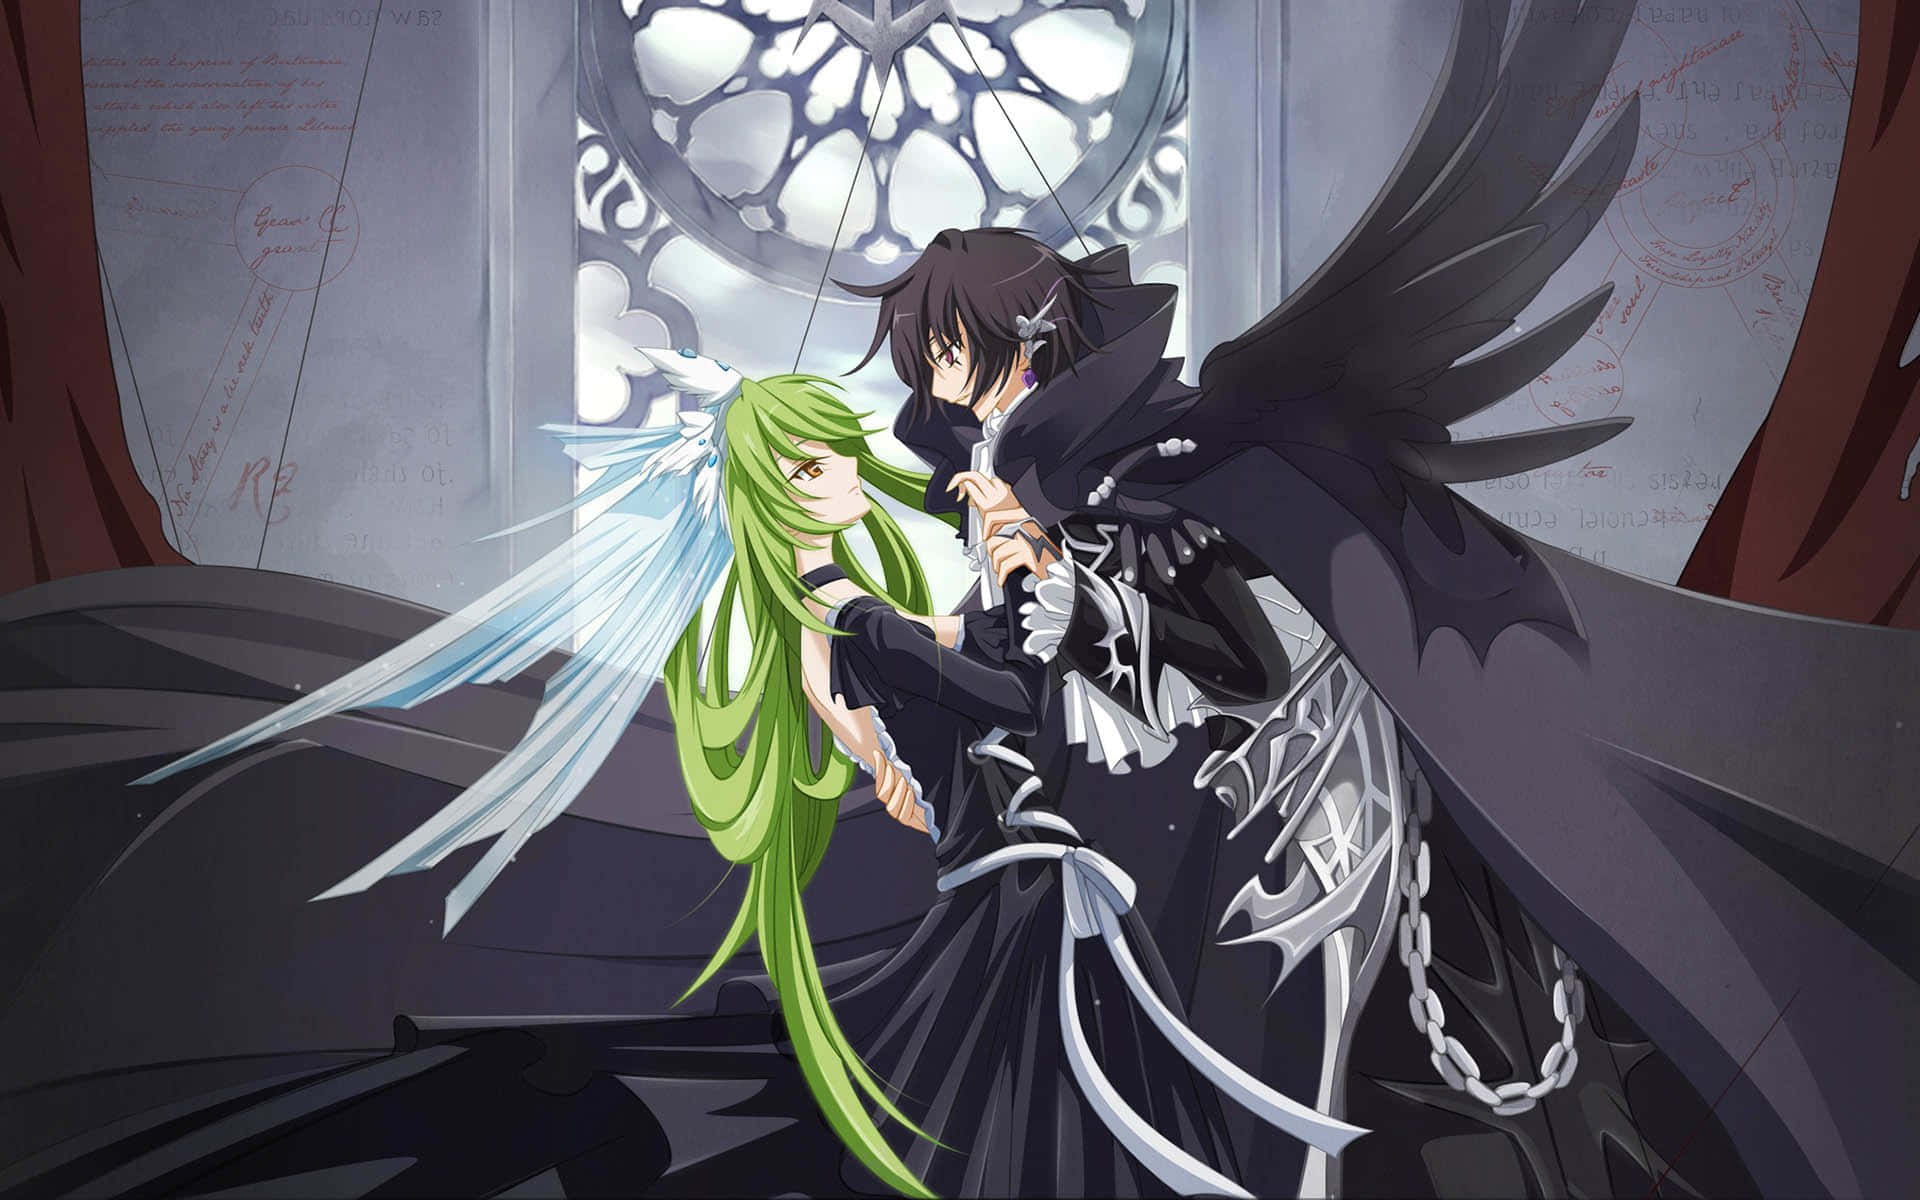 Lelouch the protector of justice